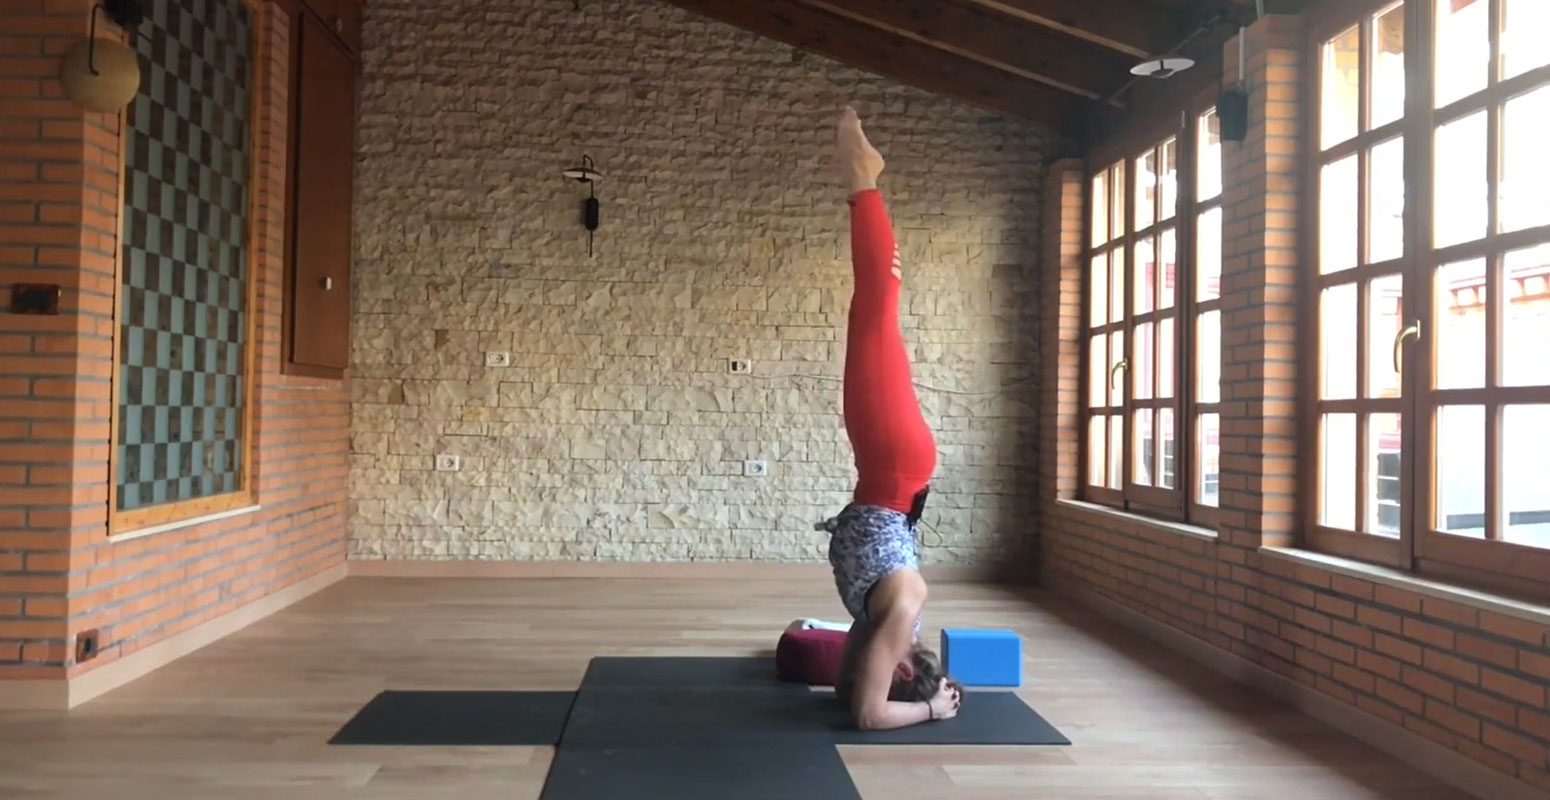 How to do a headstand: Foundation, contraindications, preparation, and limitations